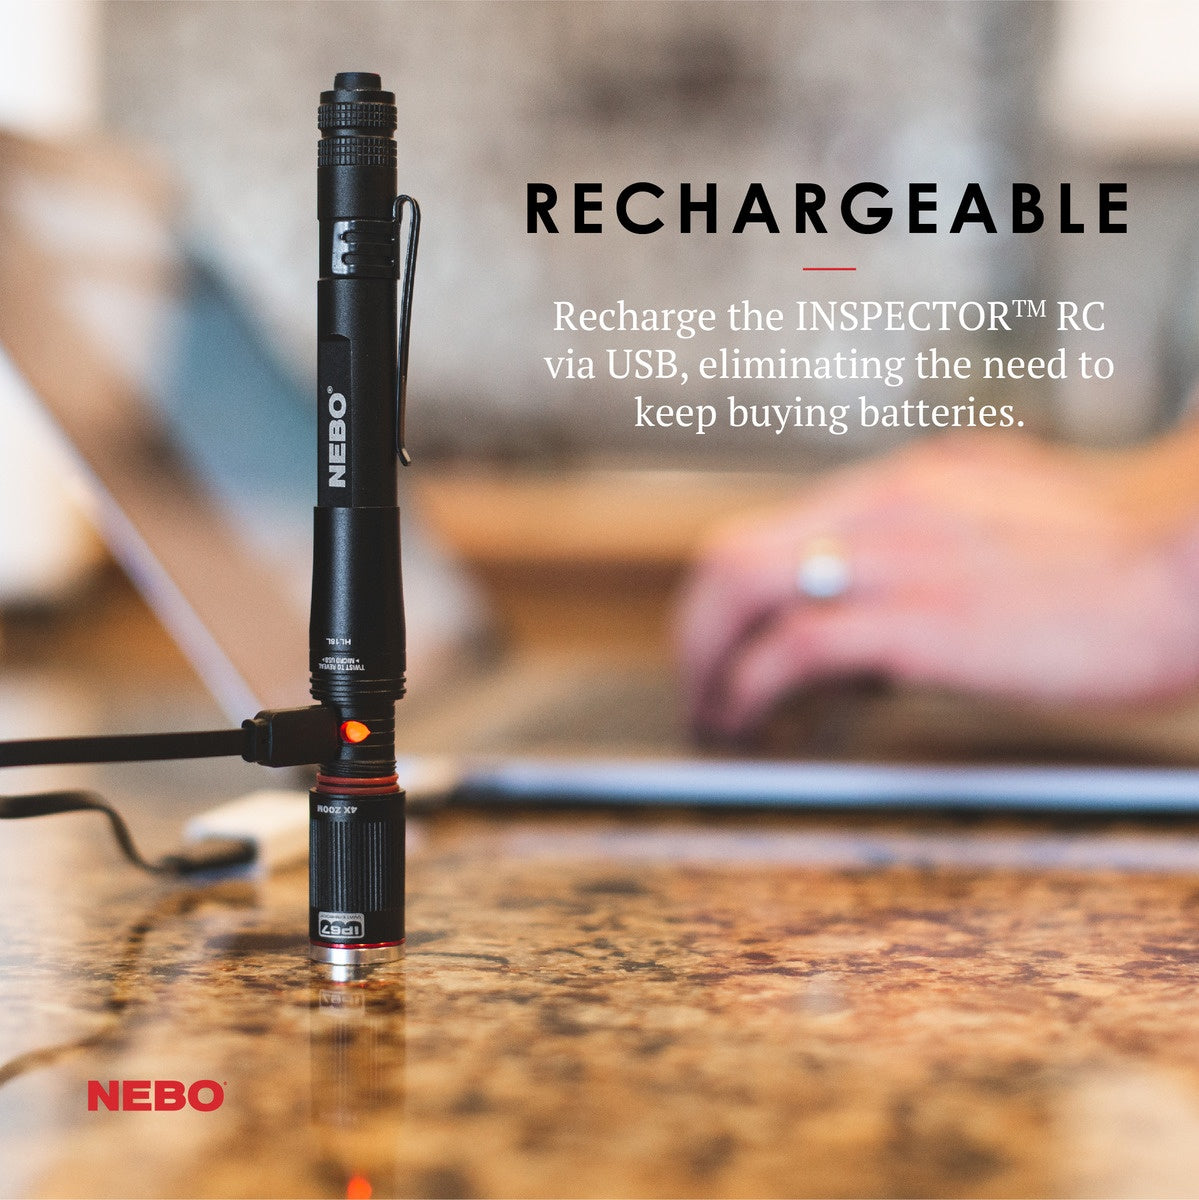 nebo inspector rc rechargeable high lumen pen light for sale near lampasas texas at hawkes outdoors 2102512882